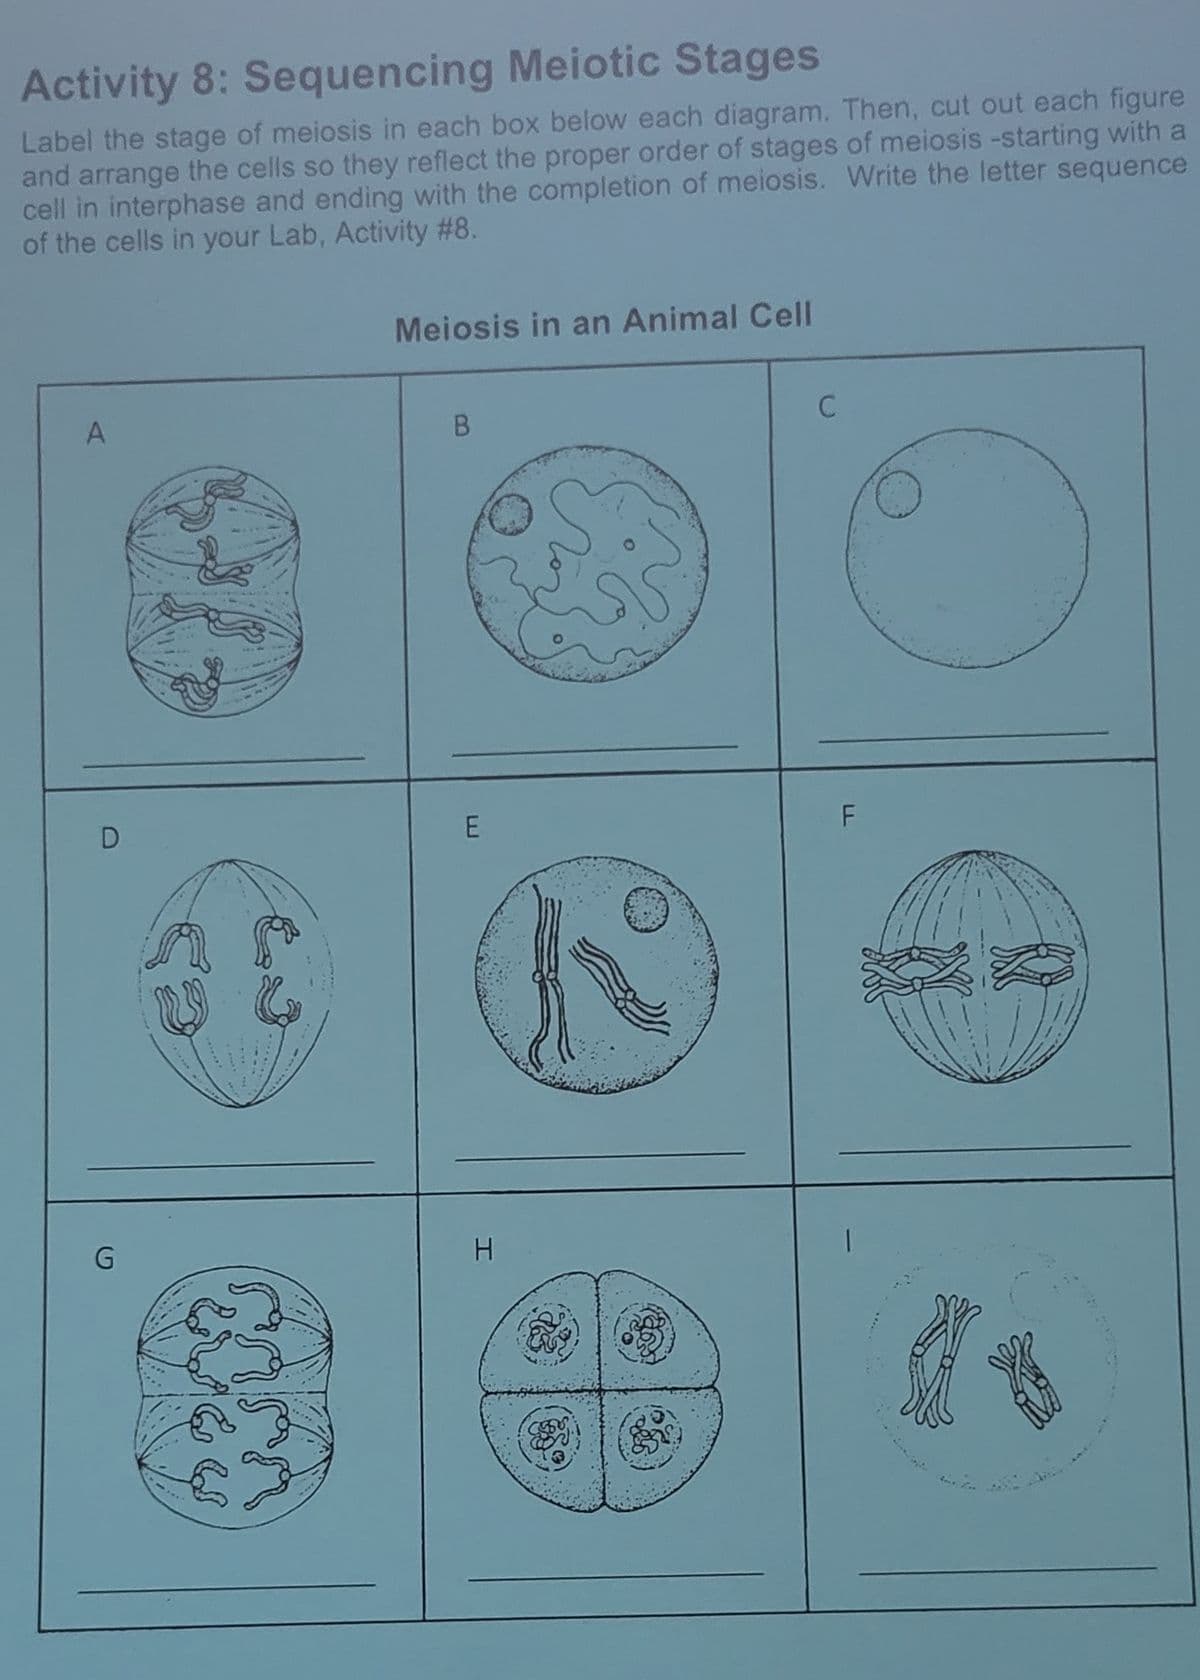 Activity 8: Sequencing Meiotic Stages
Label the stage of meiosis in each box below each diagram. Then, cut out each figure
and arrange the cells so they reflect the proper order of stages of meiosis -starting with a
cell in interphase and ending with the completion of meiosis. Write the letter sequence
of the cells in your Lab, Activity #8.
A
D
RAGU
Meiosis in an Animal Cell
B
E
H
&
C
LL
F
76
M